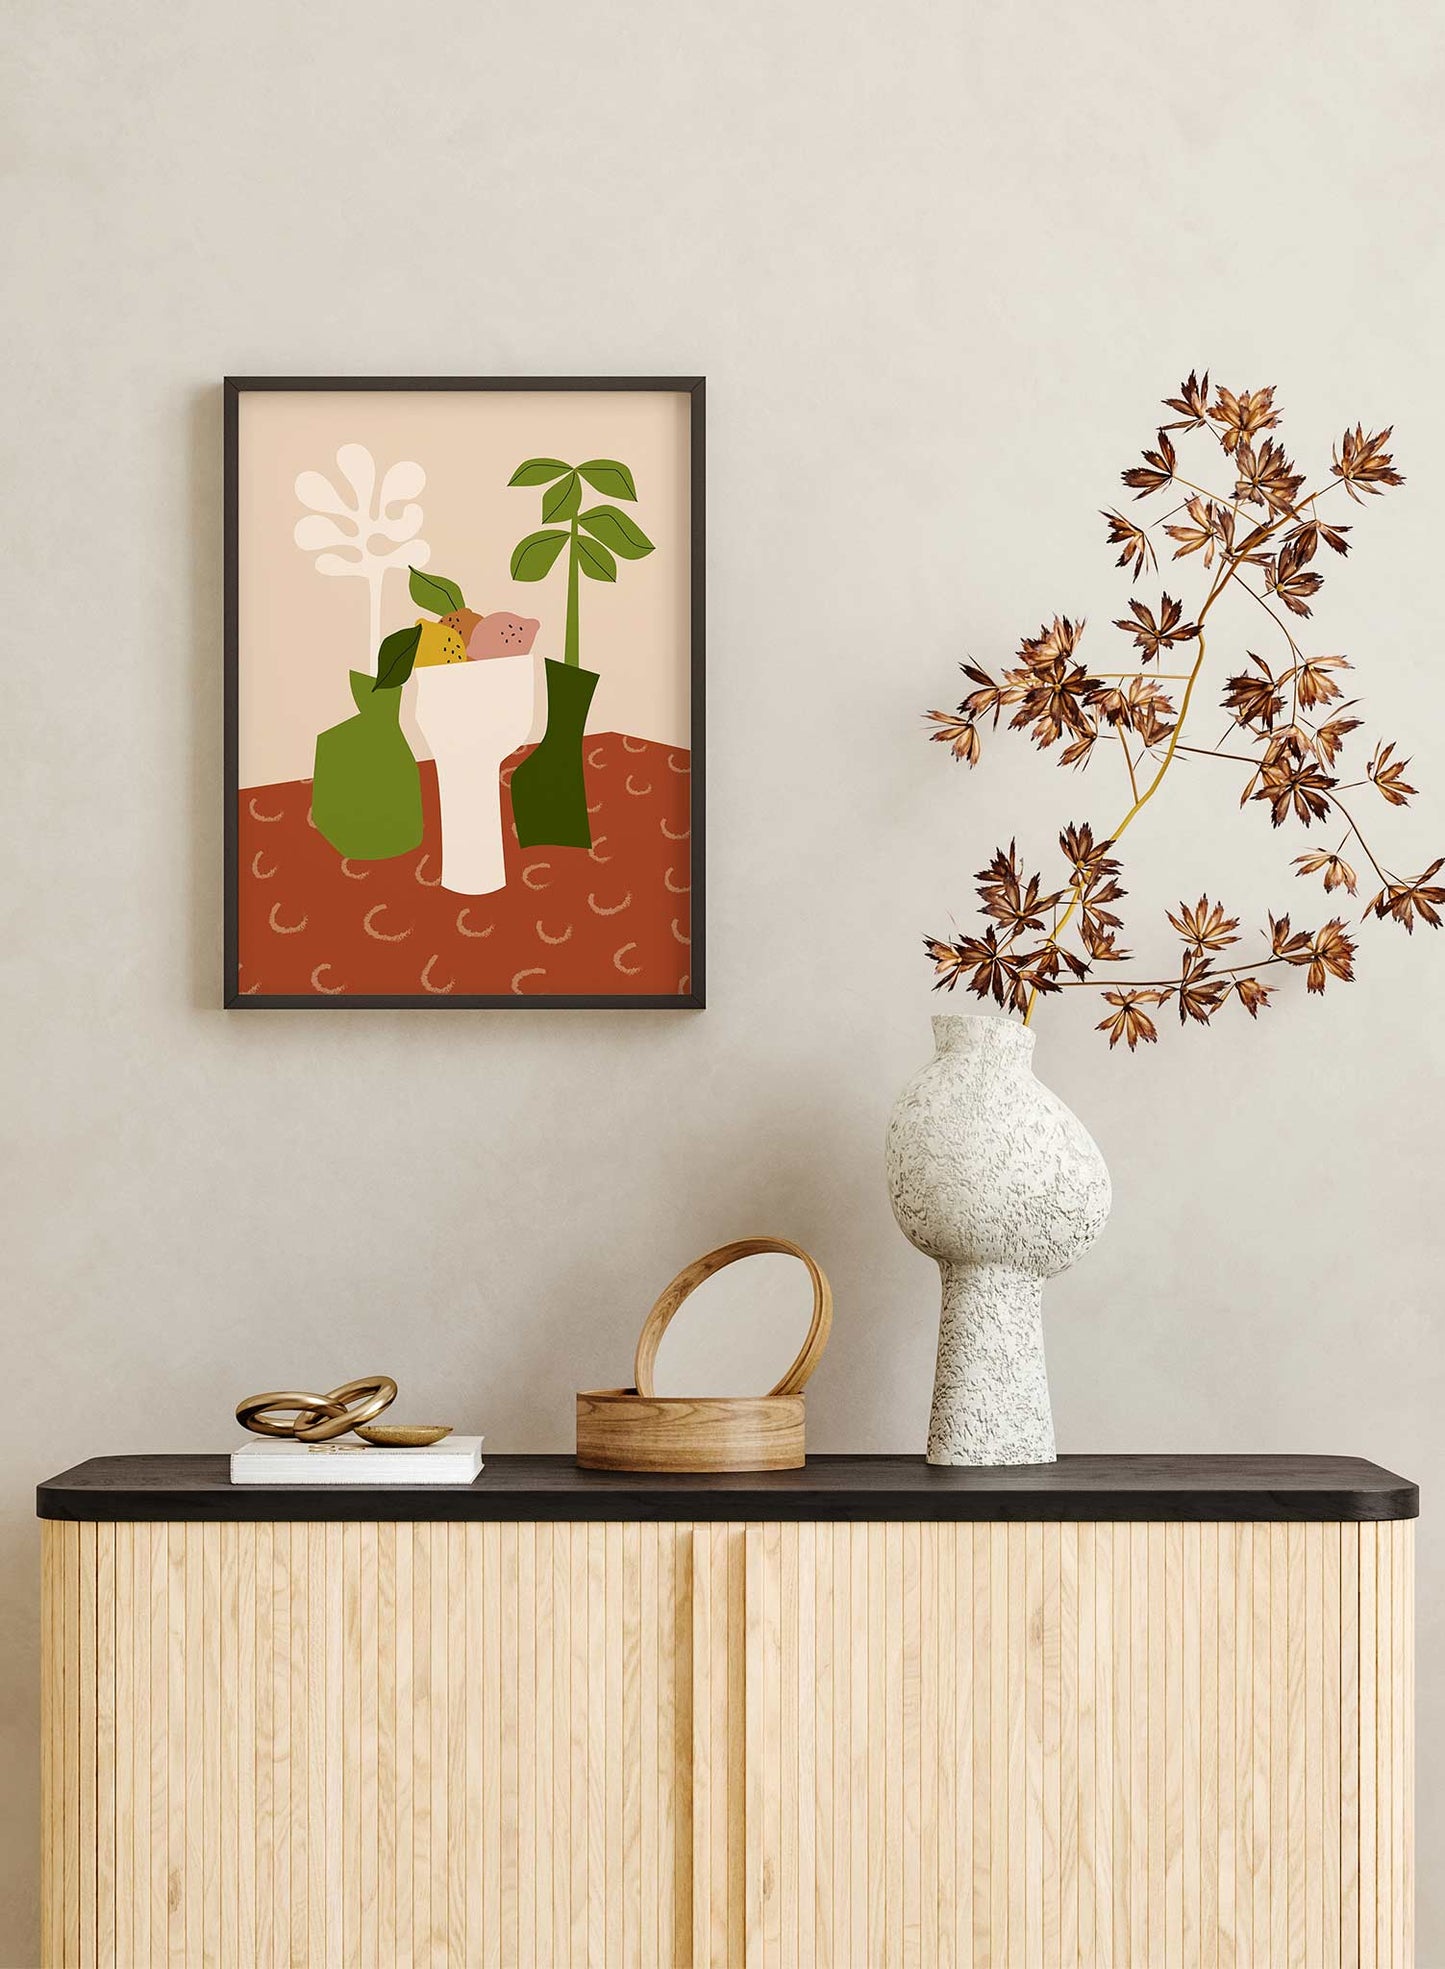 Zesty Spread is a fruit illustration poster by Opposite Wall.